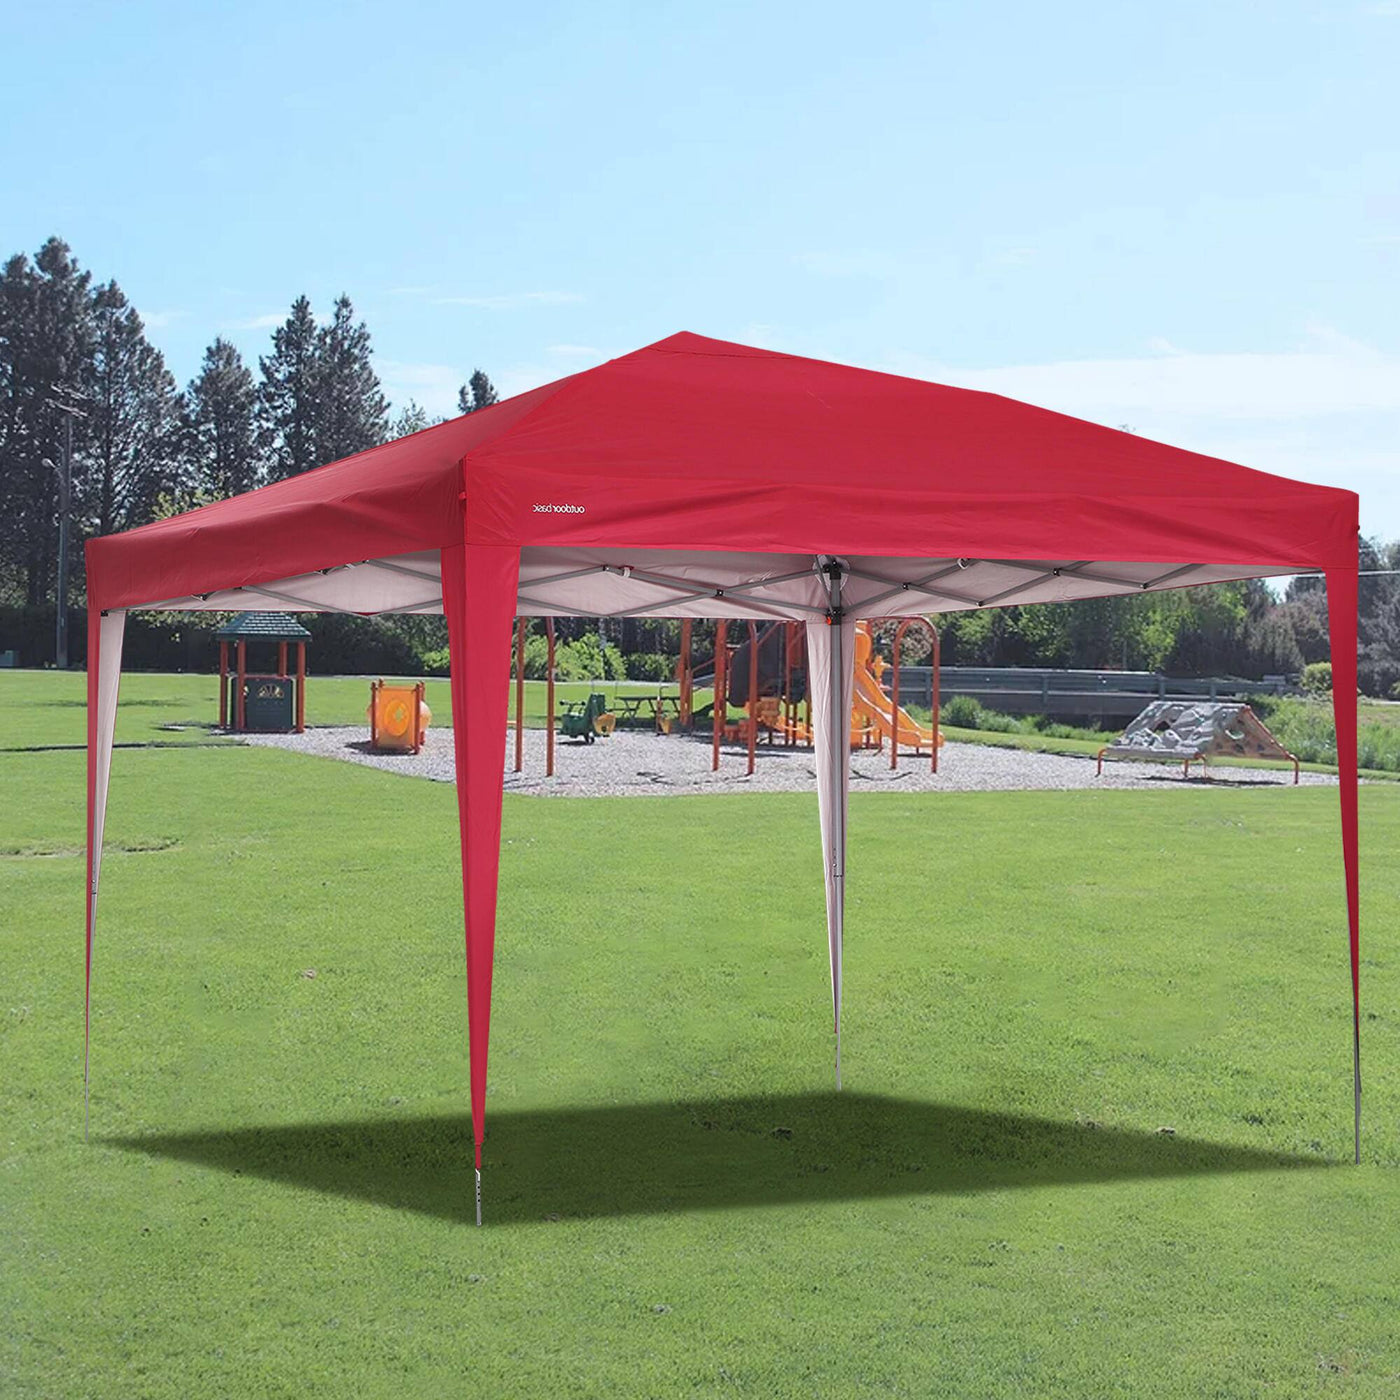 Tatayosi 10 ft. x 10 ft. Red Outdoor Patio Event/Party Canopy Tents Adjustable Height - $75